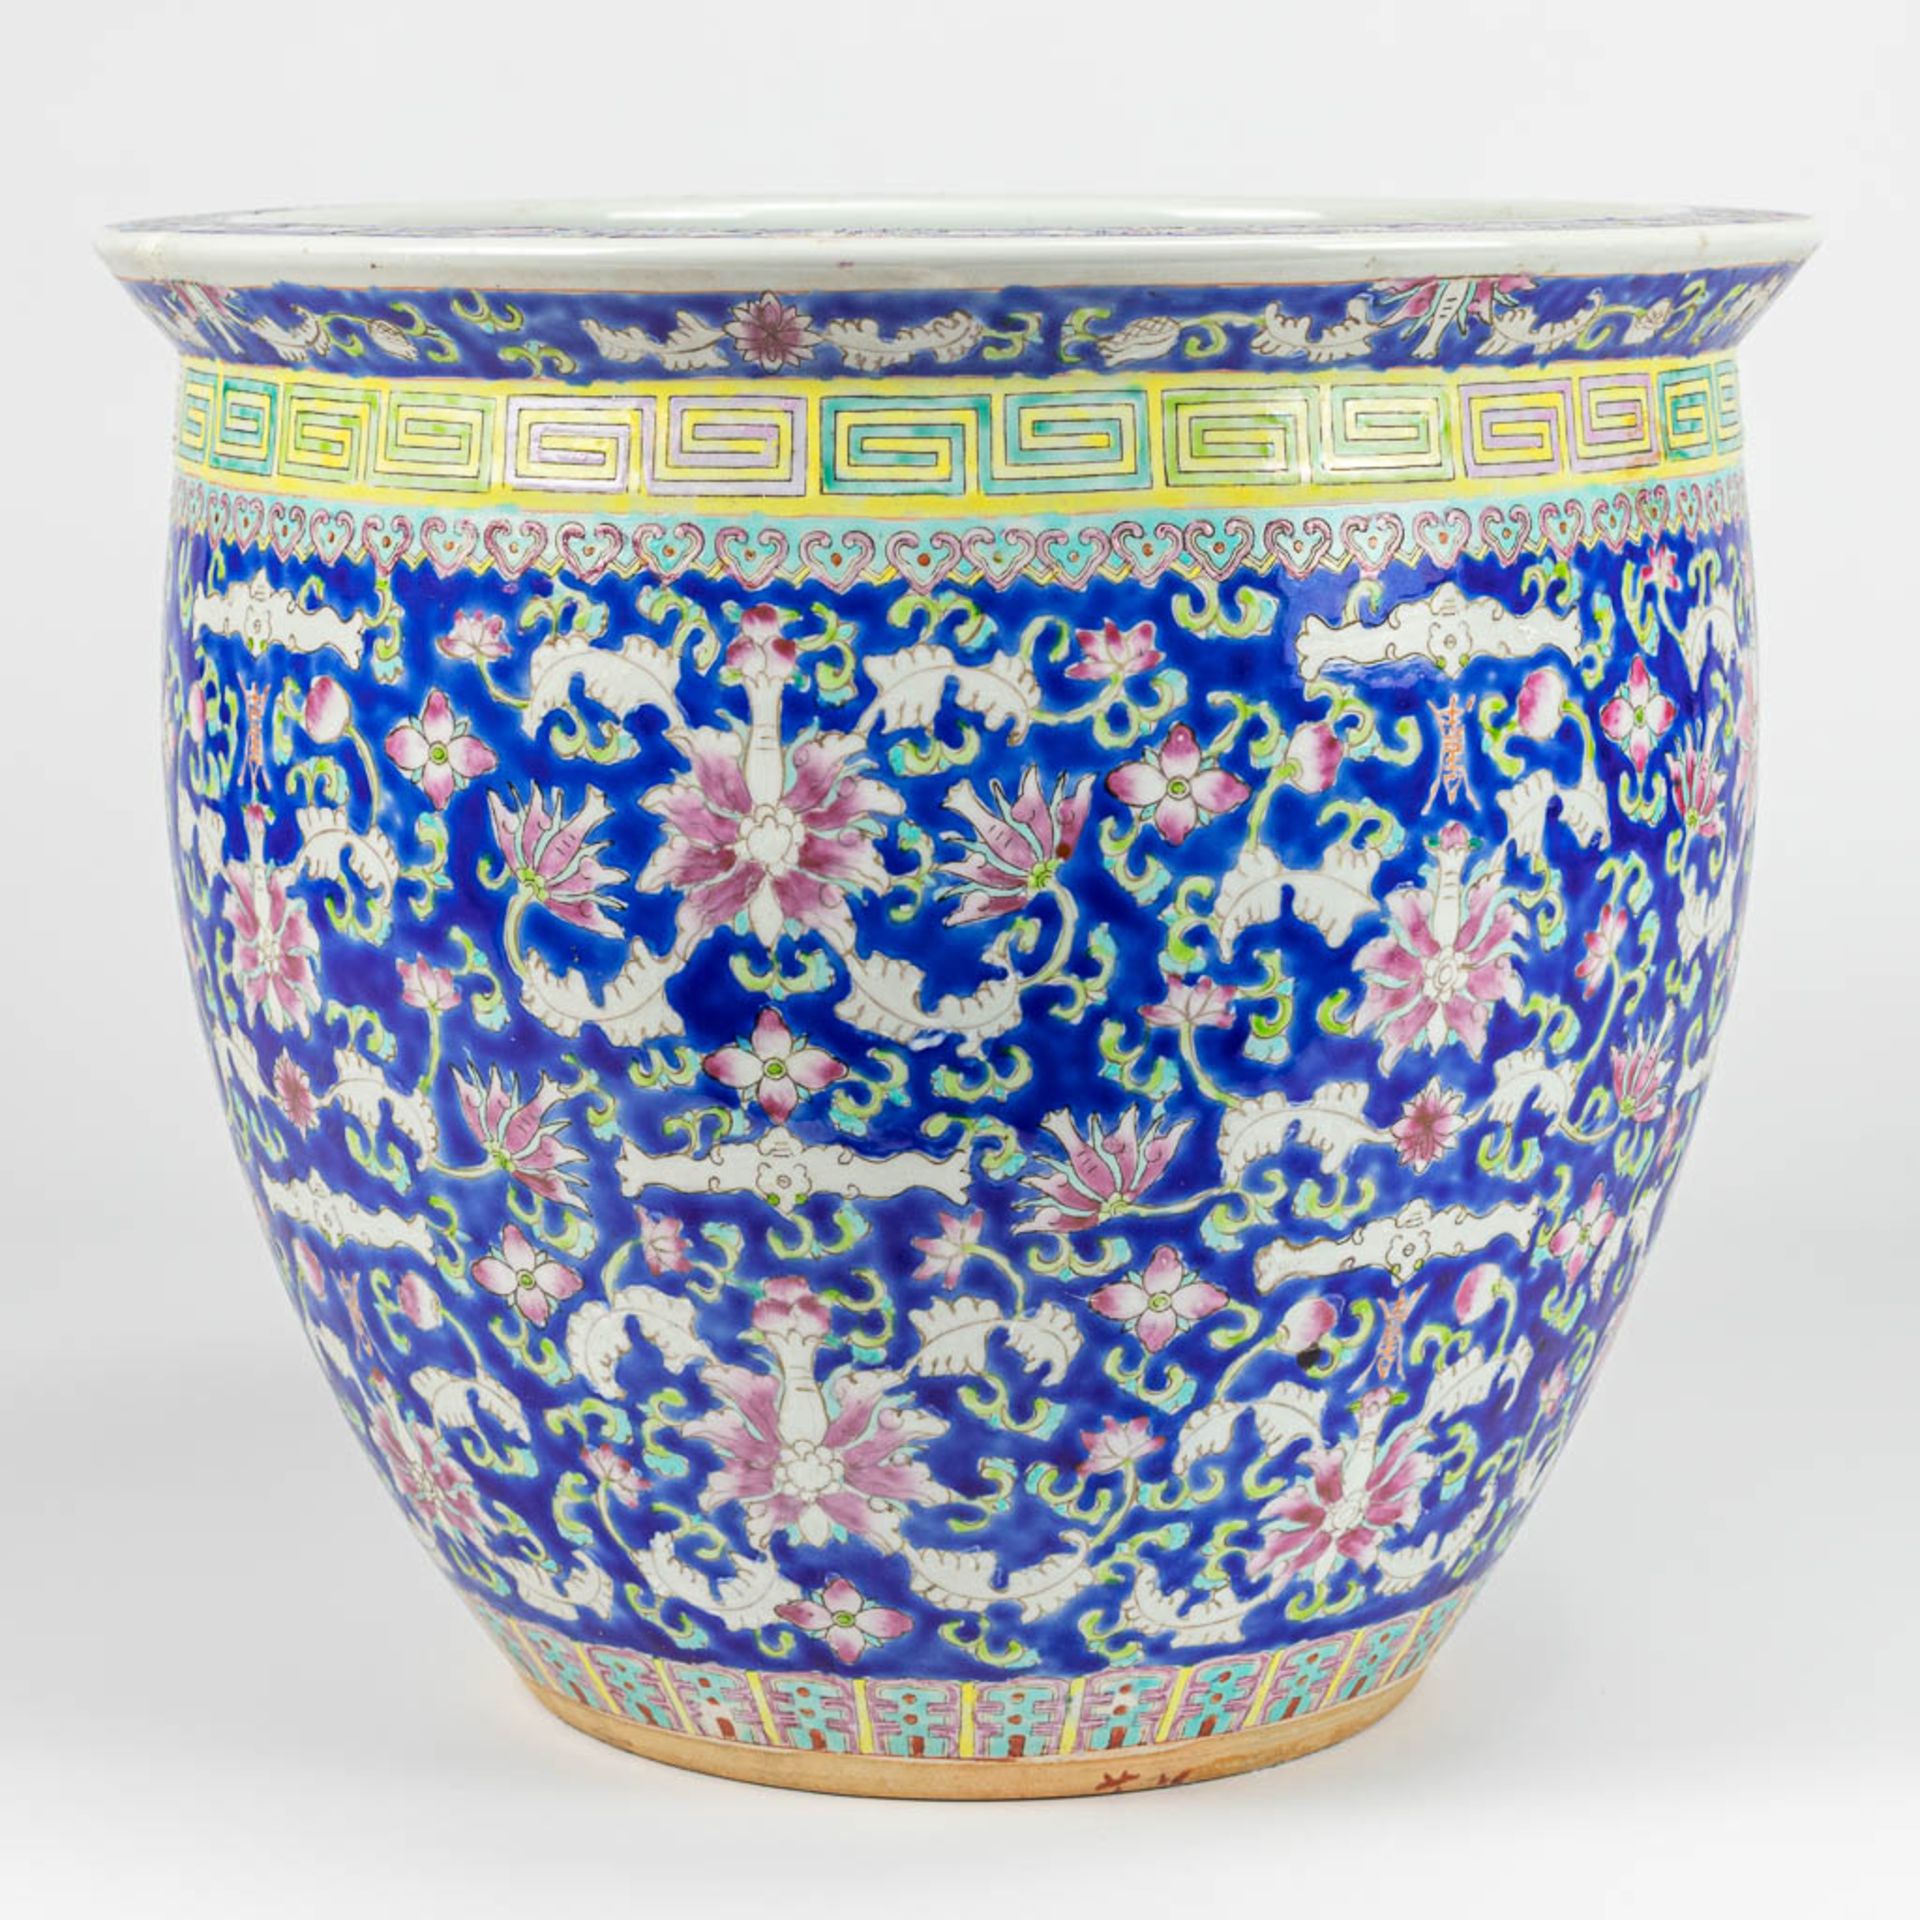 A large cache-pot made of Chinese porcelain and decorated with flowers - Image 3 of 10